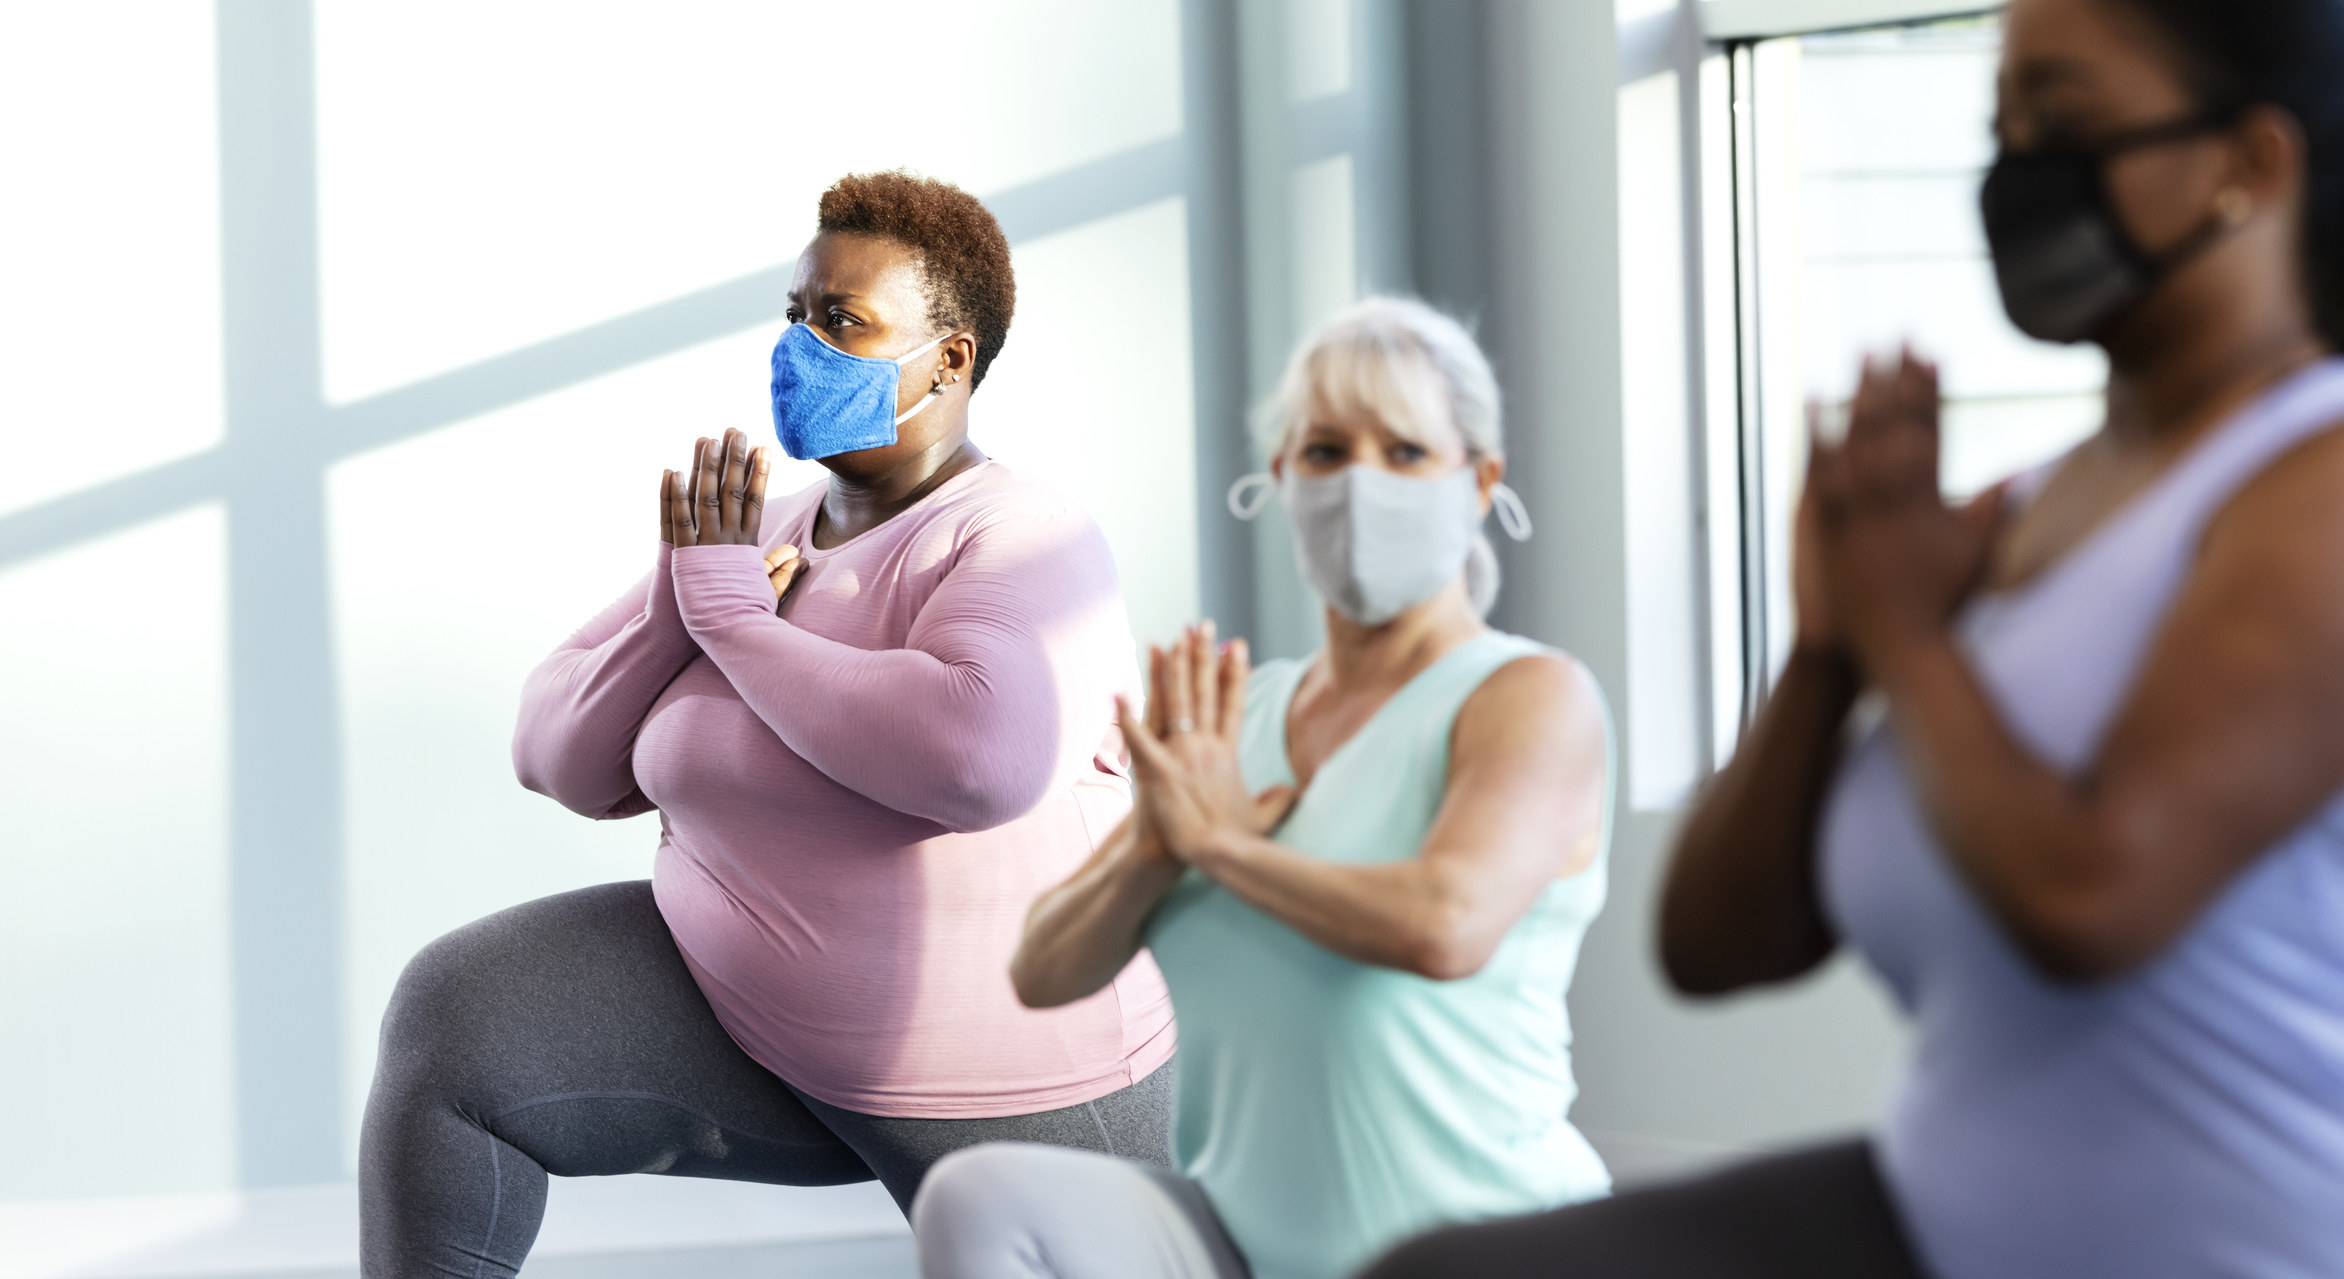 People wearing masks and doing yoga in an office